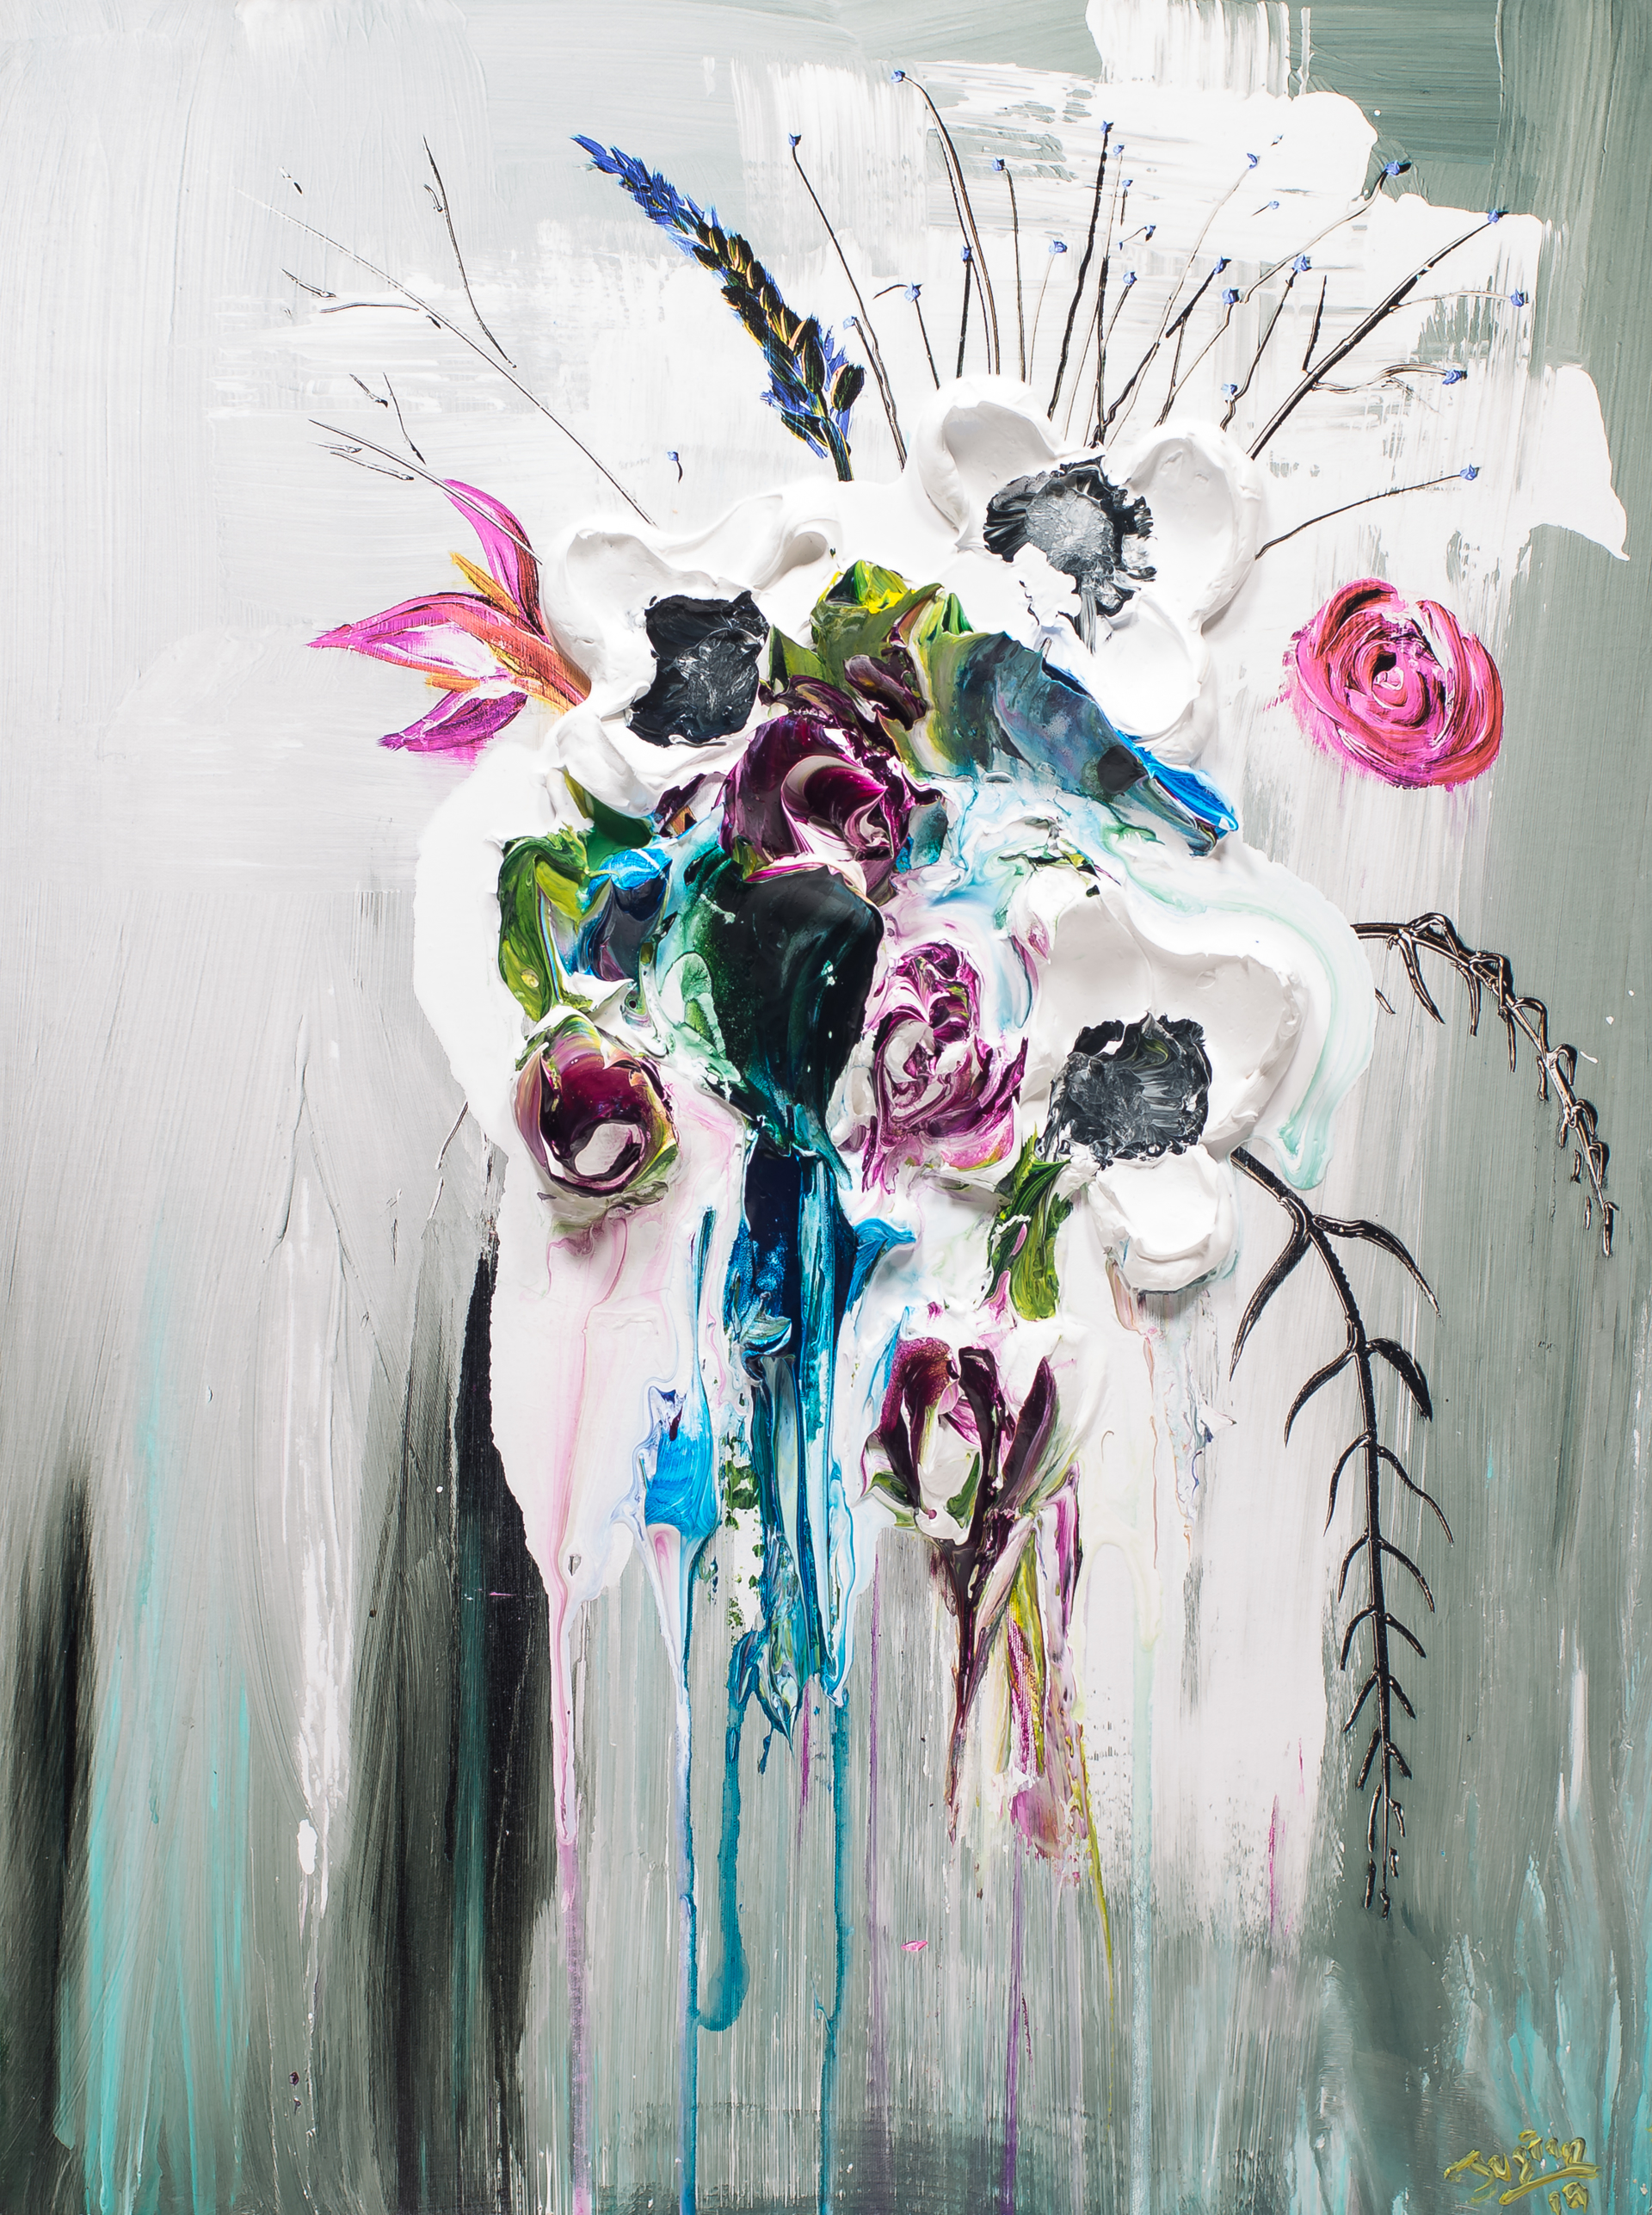 ABSTRACT FLORAL BOUQUET HPAE 7/50 by JUSTIN GAFFREY